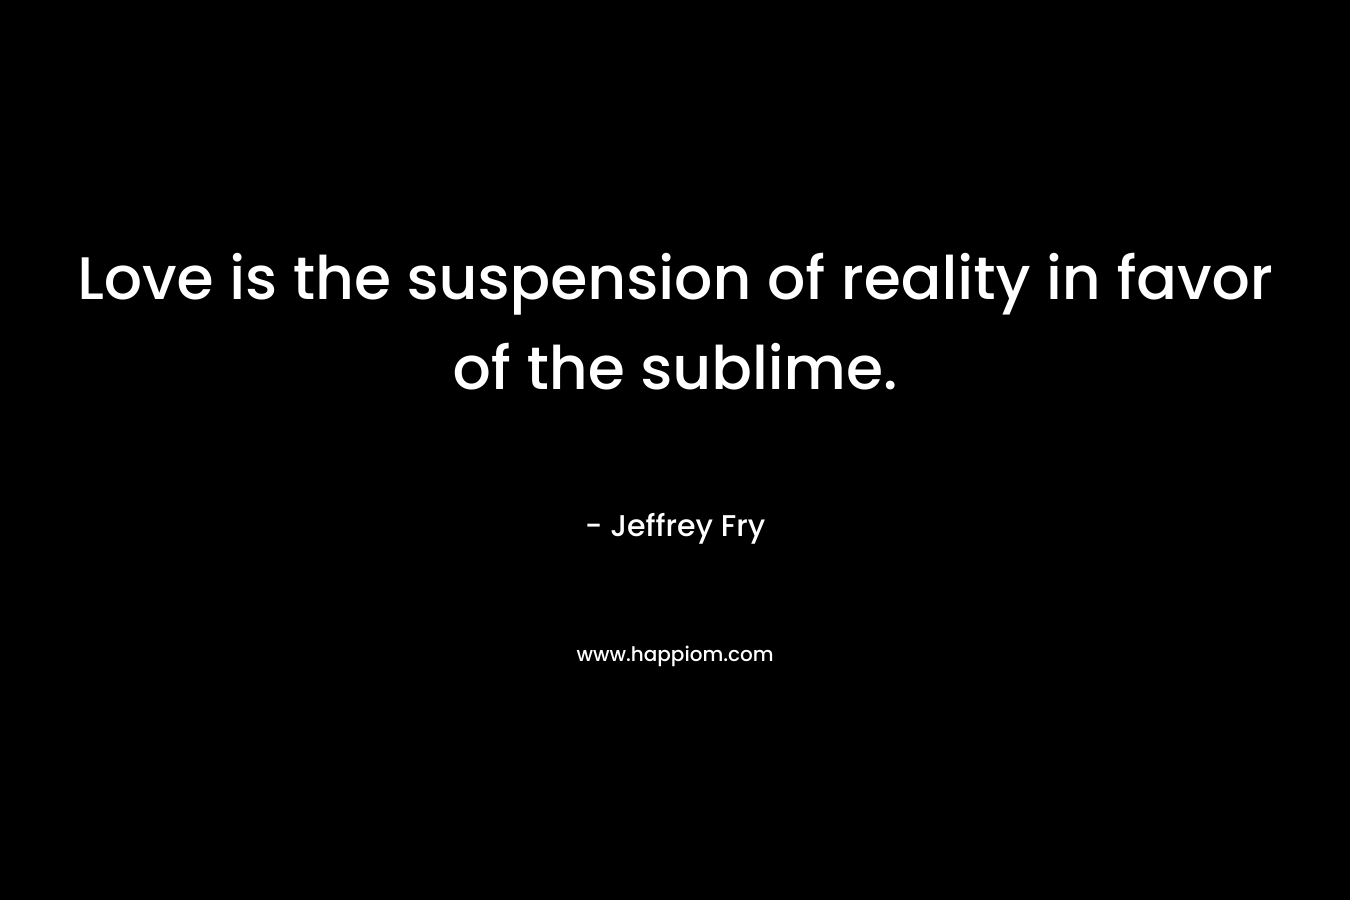 Love is the suspension of reality in favor of the sublime.